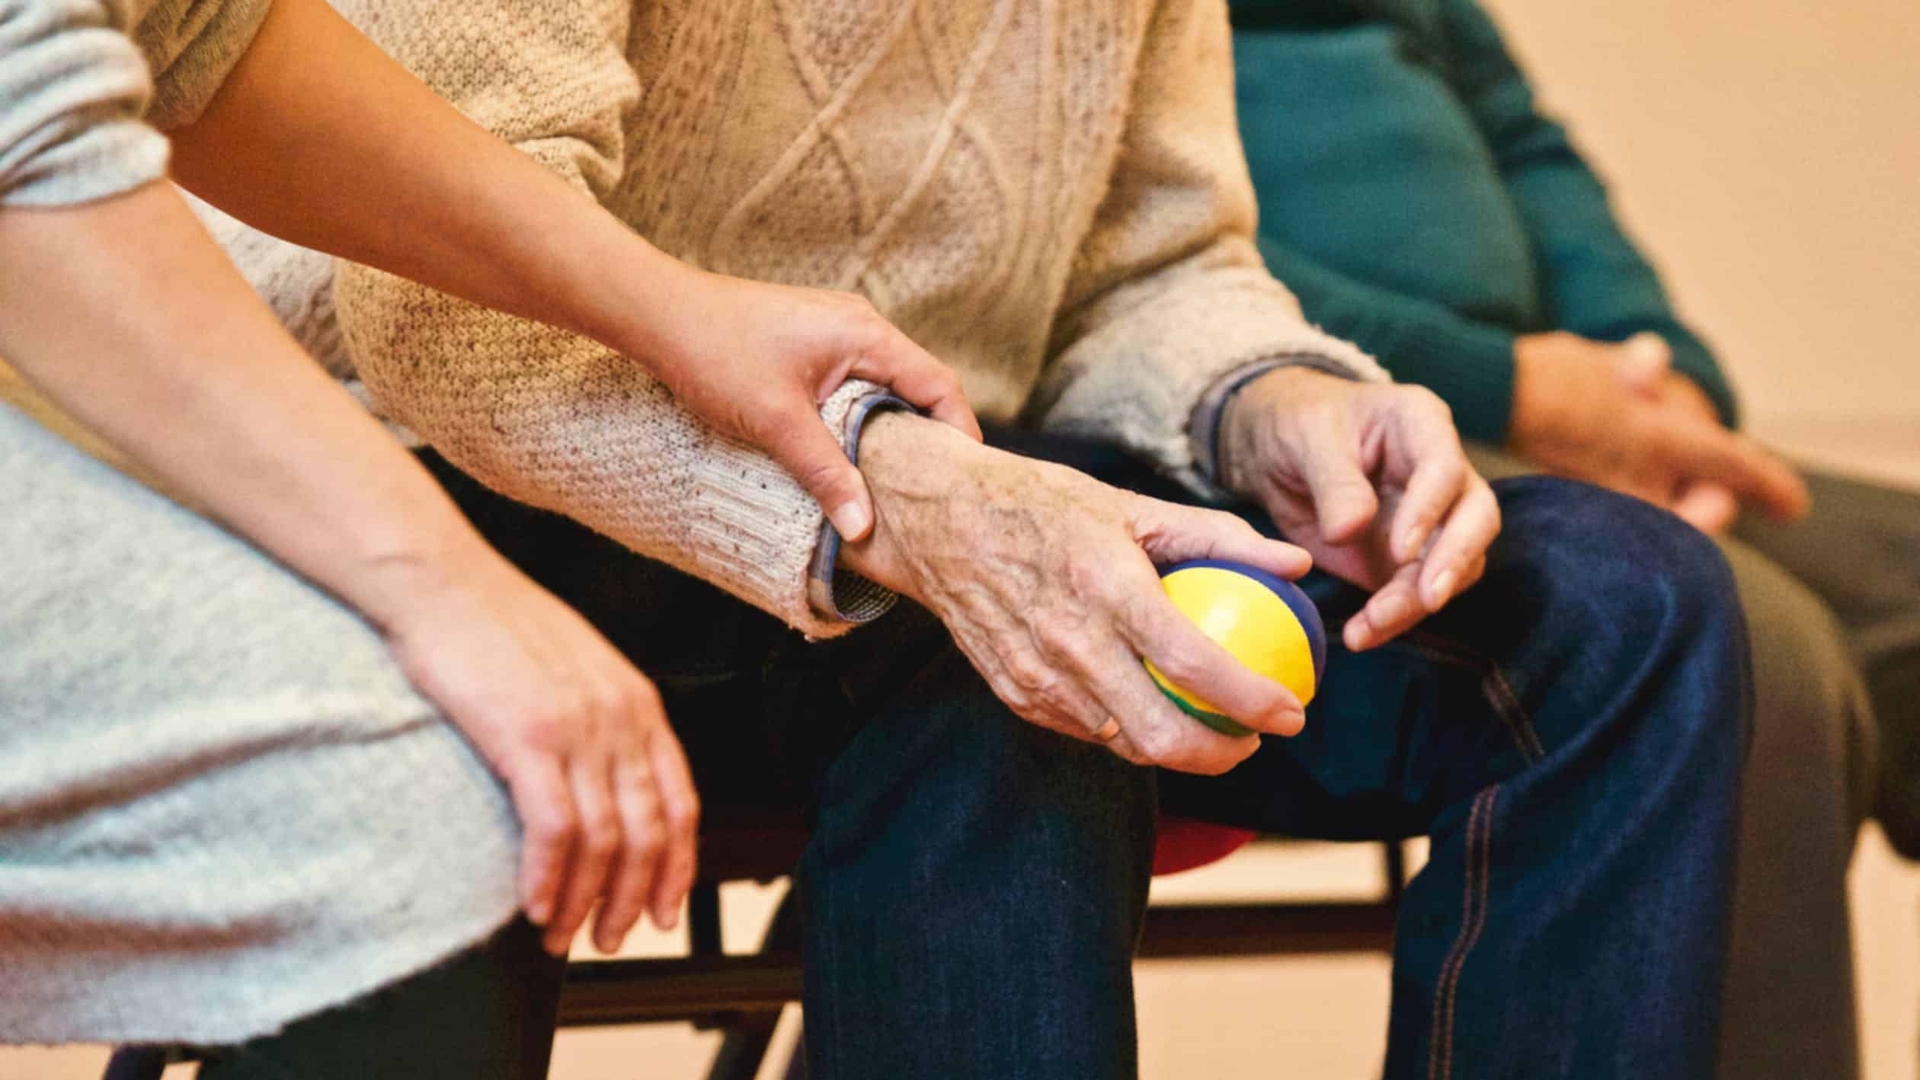 caregiver and elderly person holding a ball